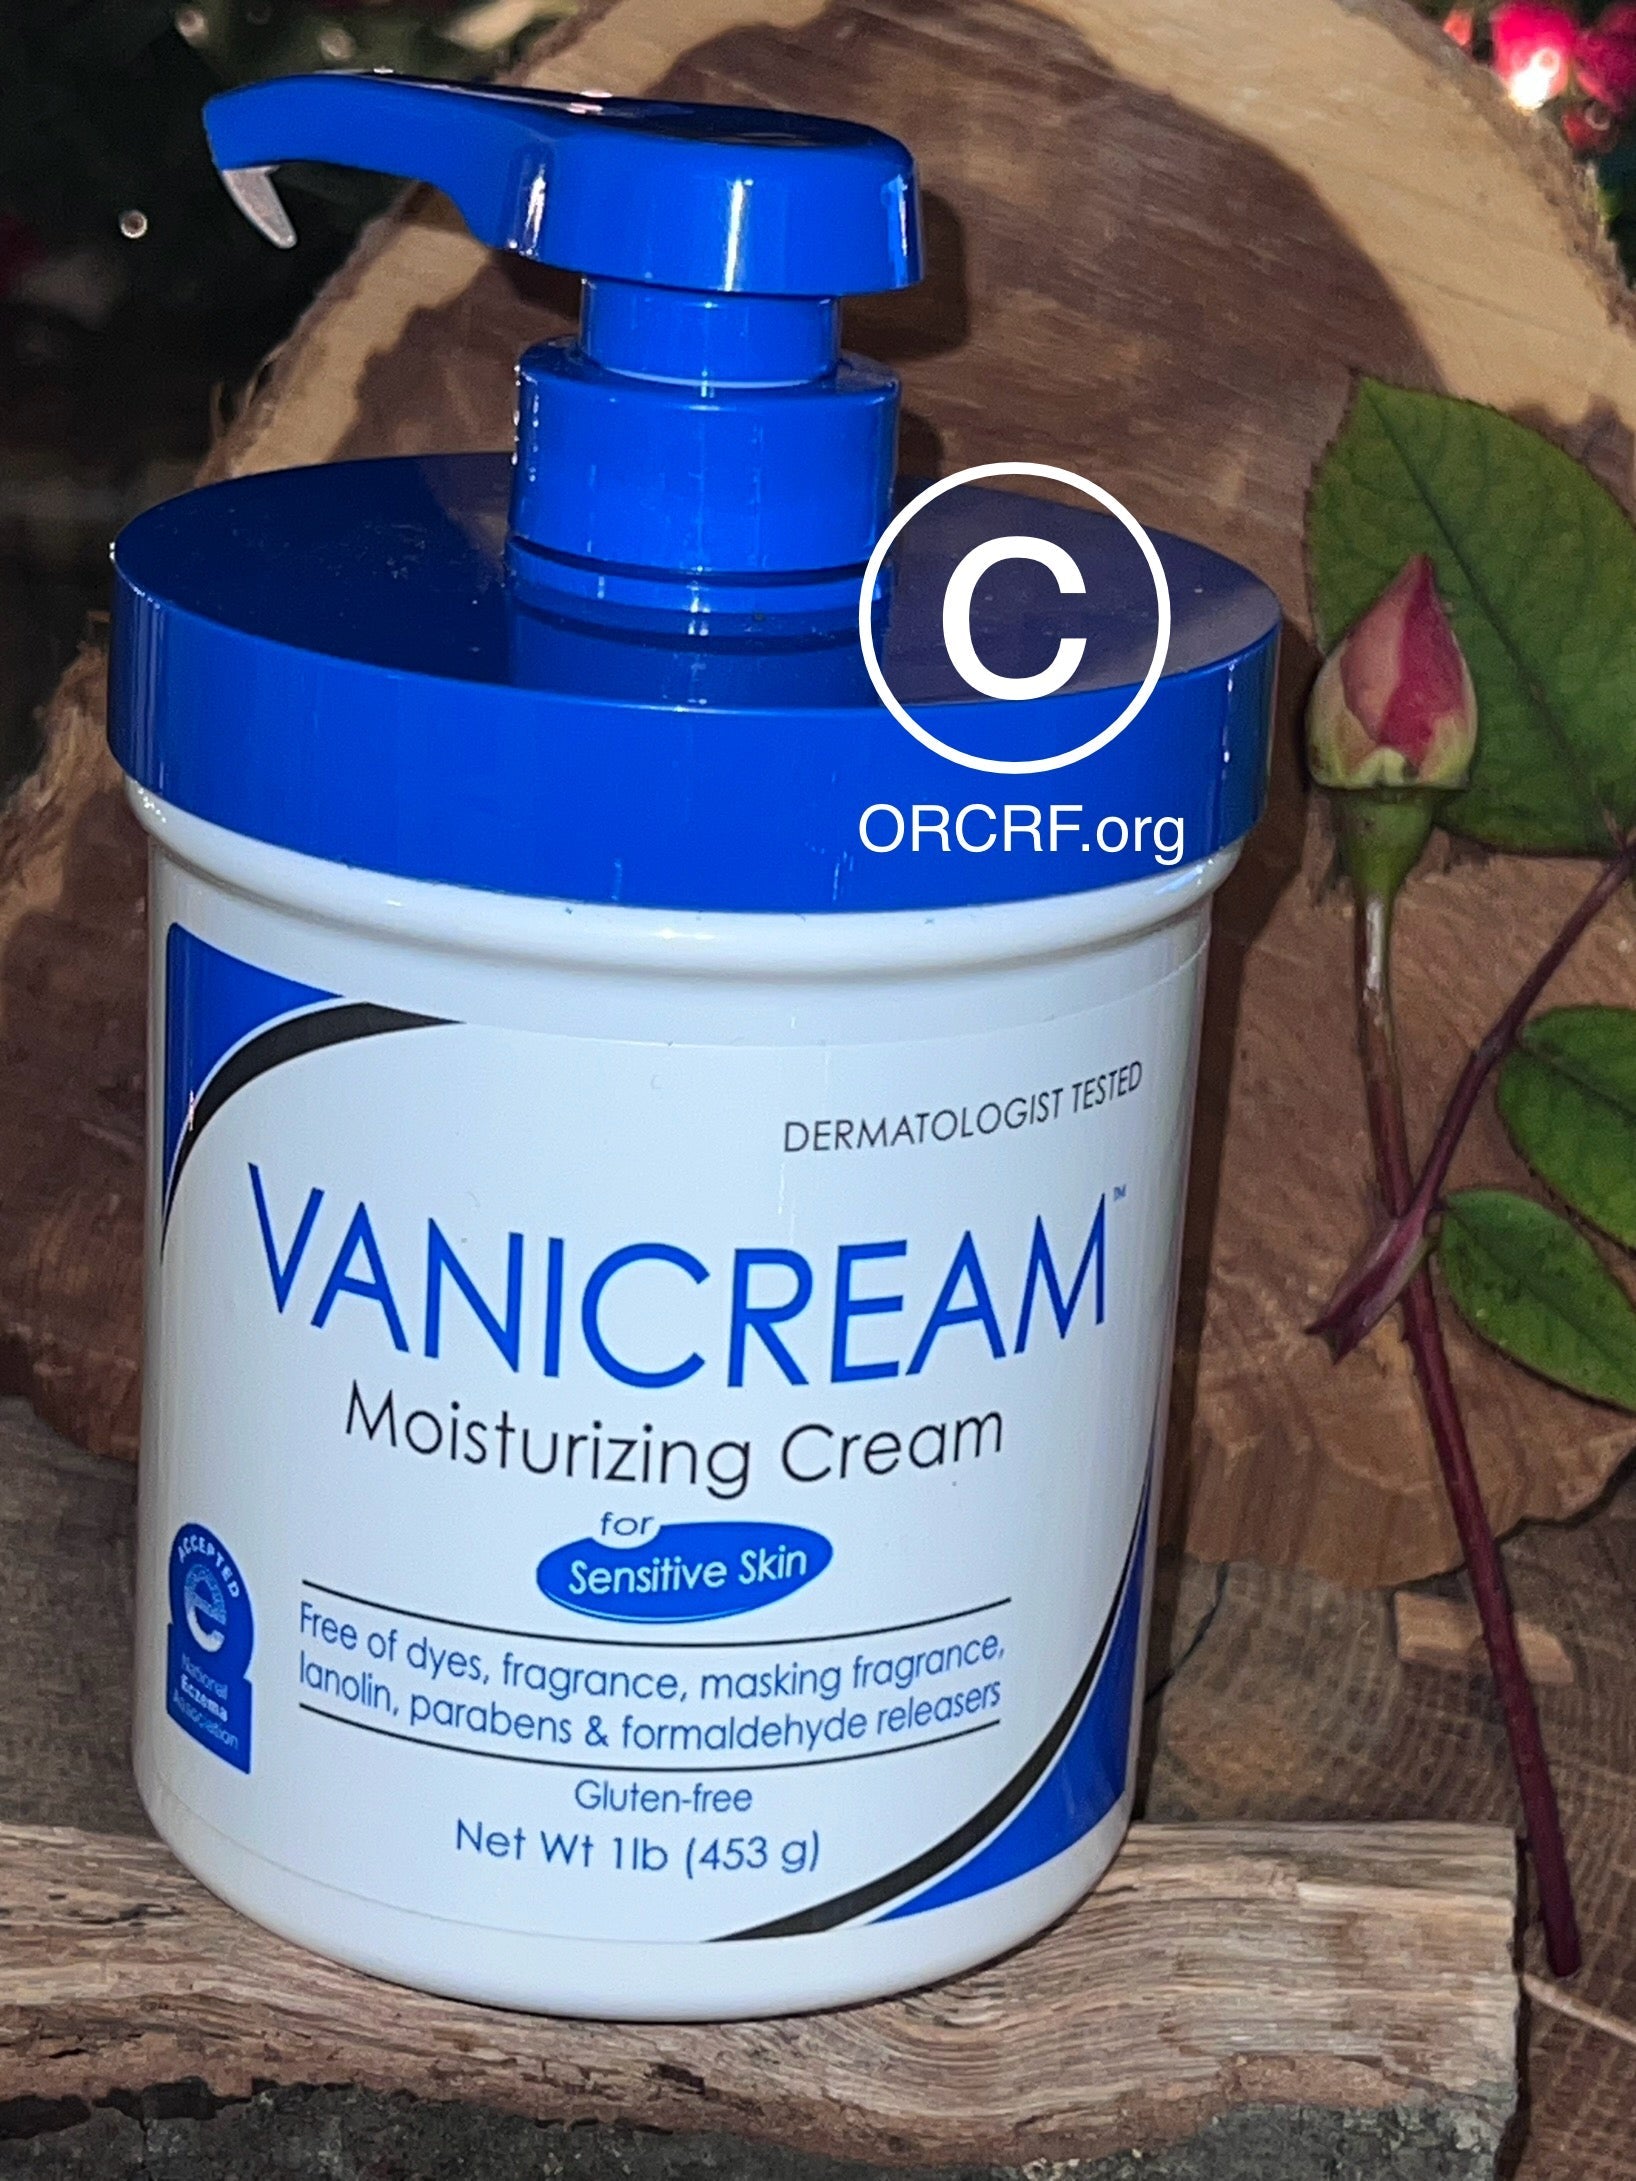 Vanicream MOISTURIZING SKIN CREAM with PUMP DISPENSER for SENSITIVE SKIN - 16 fl oz (1 lb) - Moisturizer Formulated Without Common Irritants for Those with Sensitive Skin - Supporting ORCRF.org